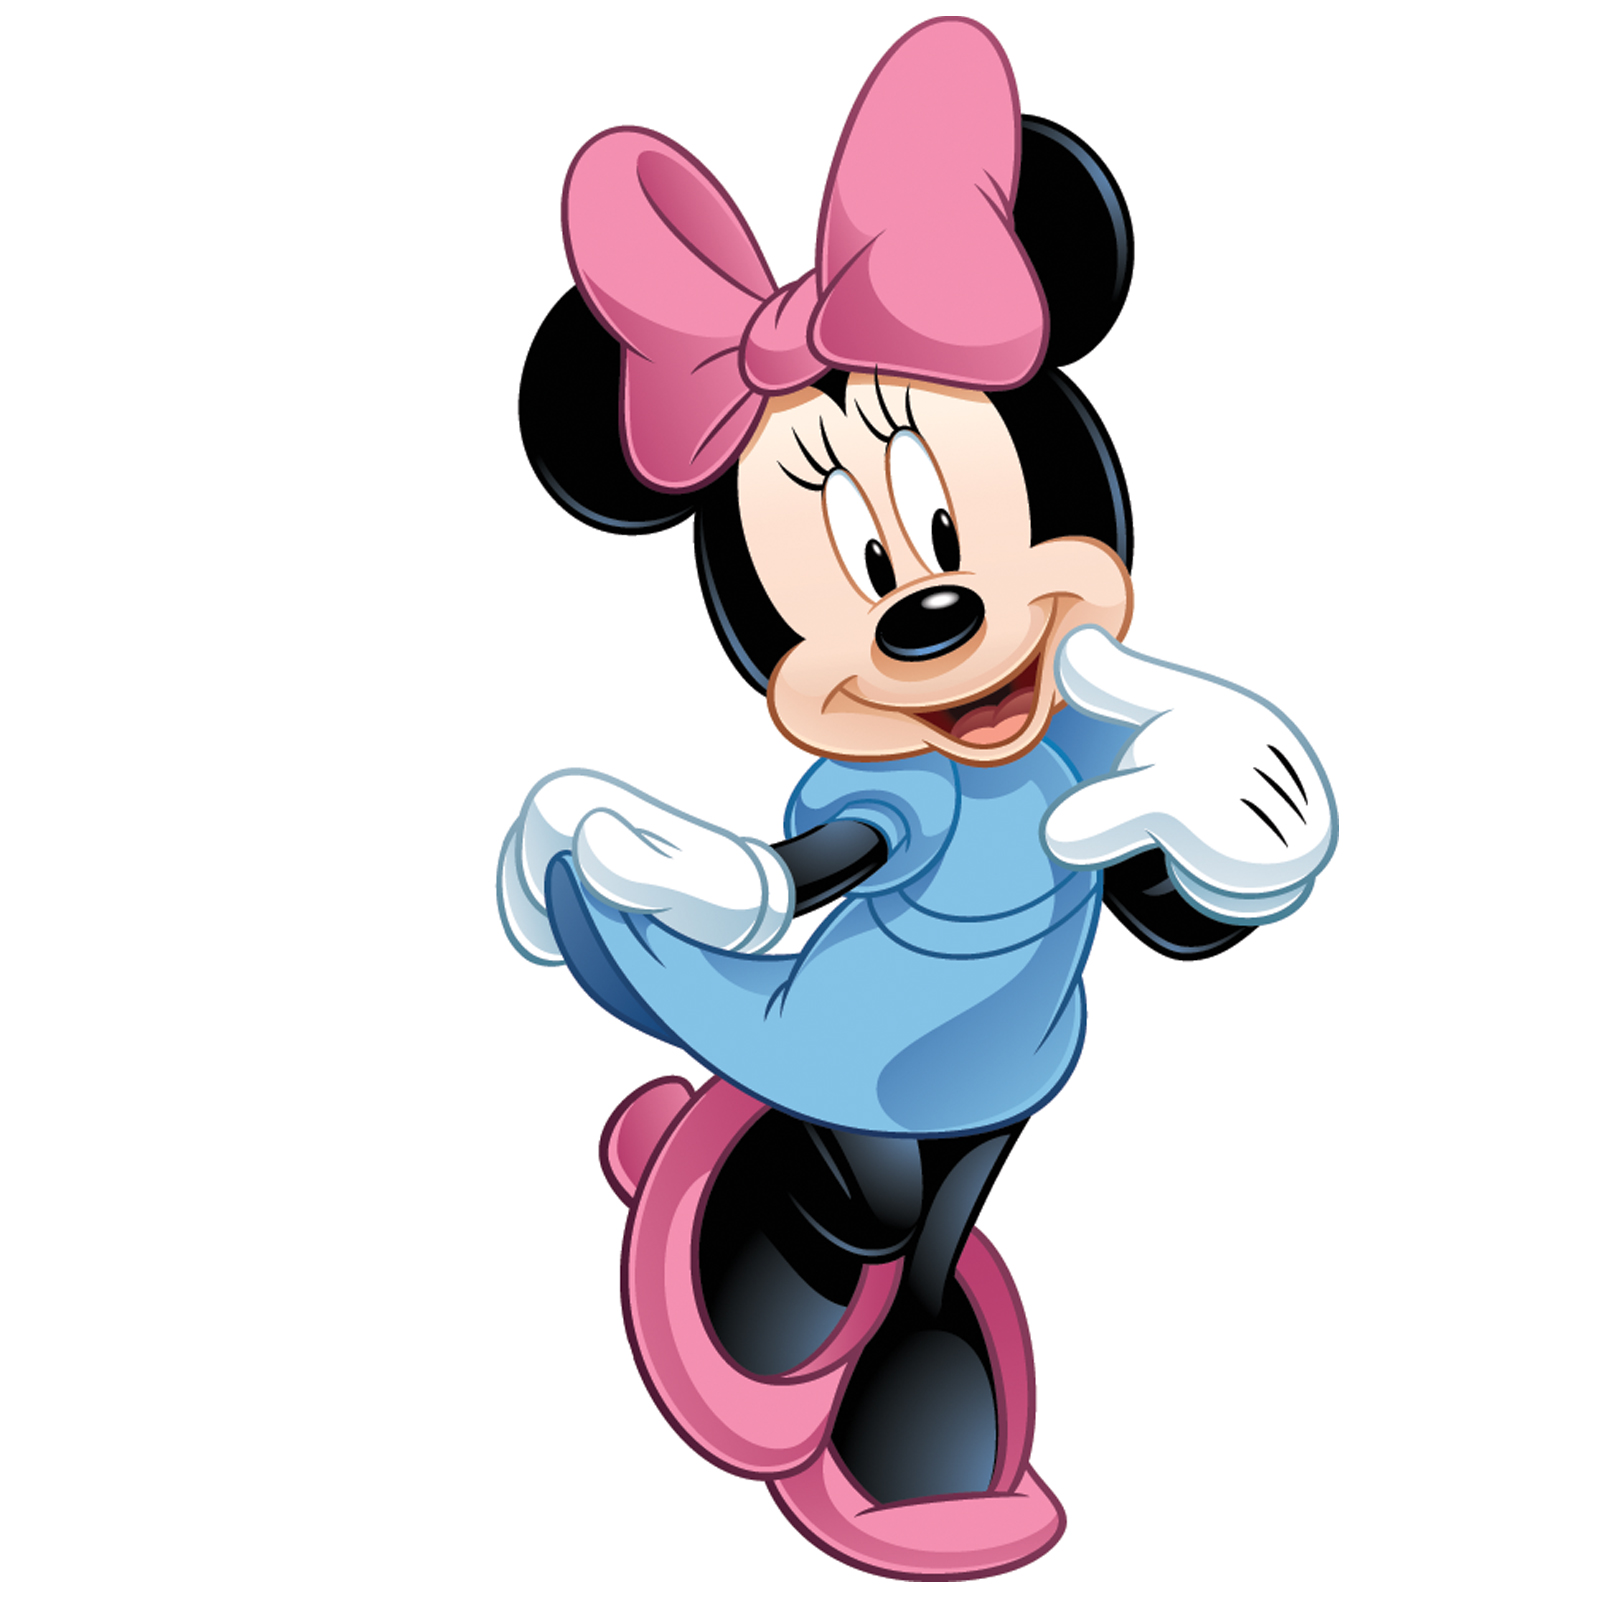 Minnie Mouse | Disney's House of Mouse Wiki | FANDOM powered by Wikia